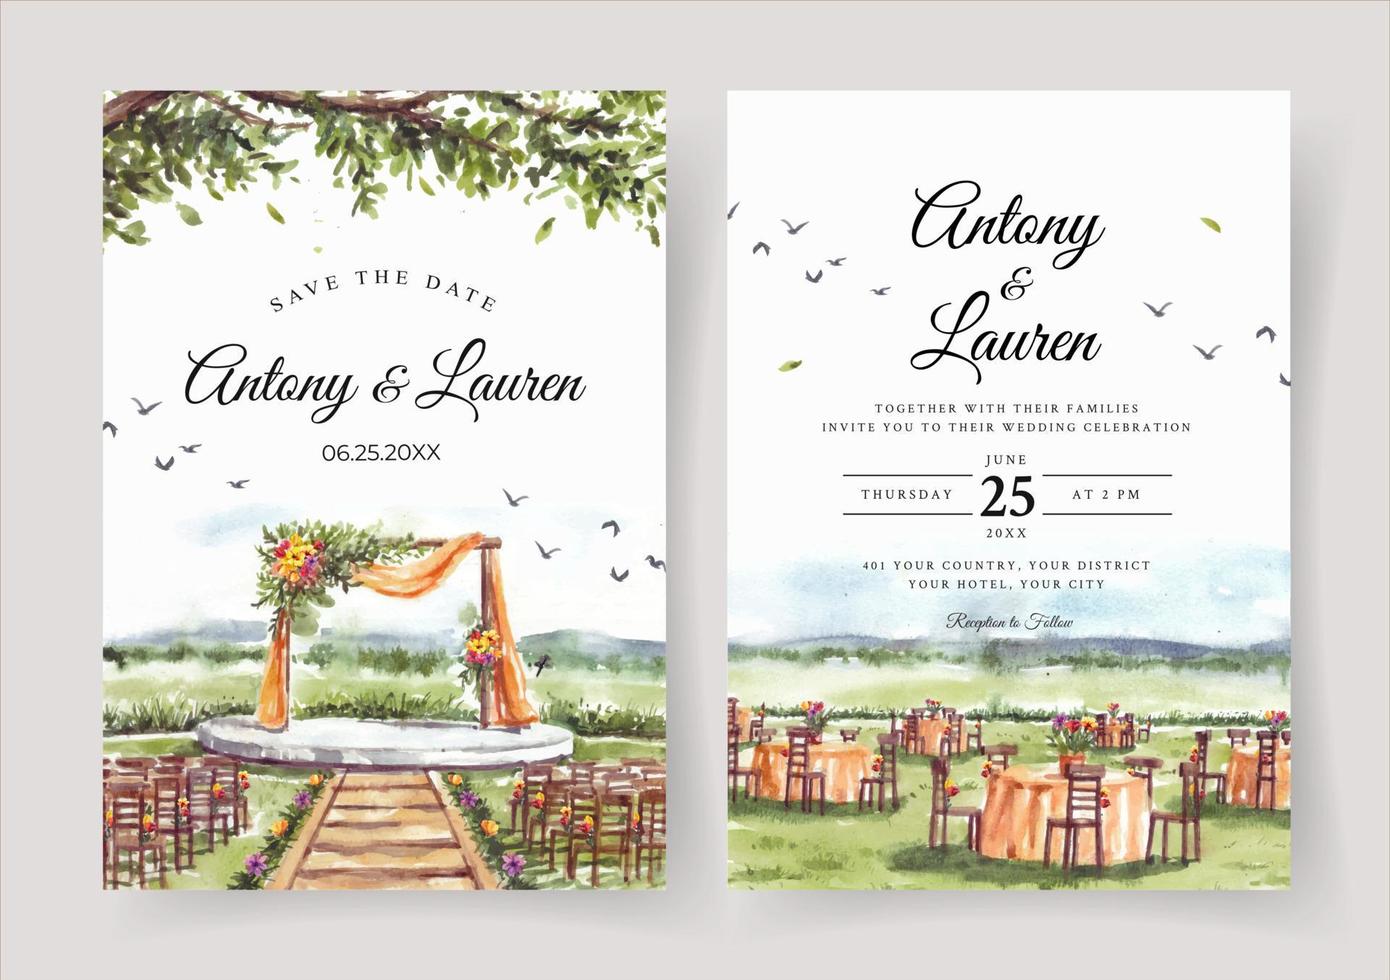 Wedding invitation of nature landscape with beautiful wedding gate view watercolor vector